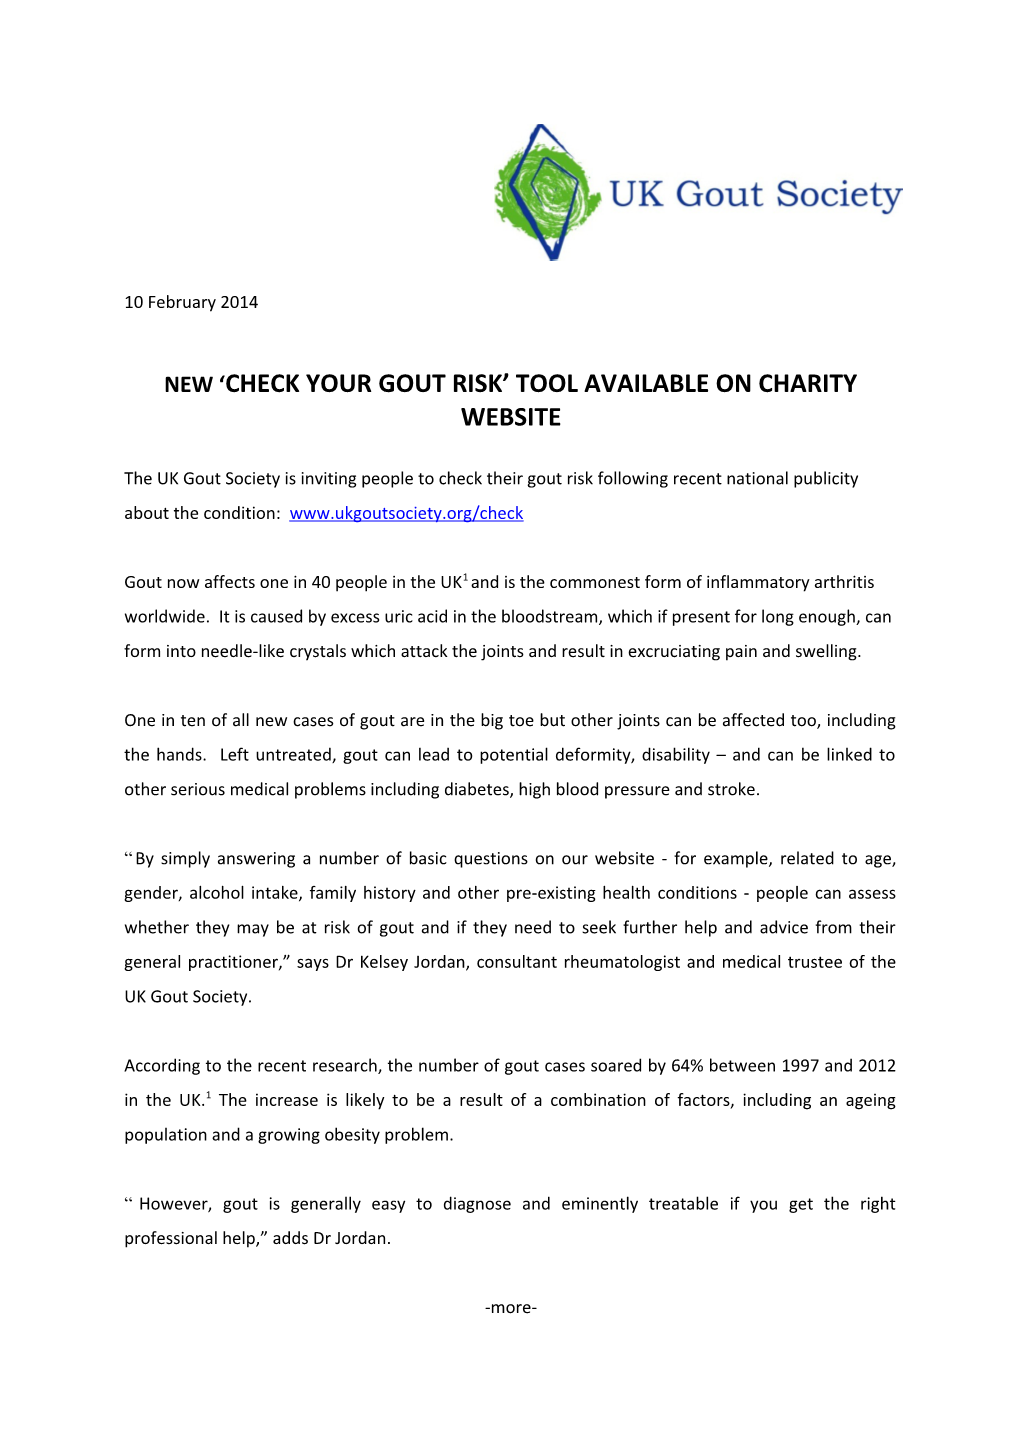 New Check Your Gout Risk Tool Available on Charity Website